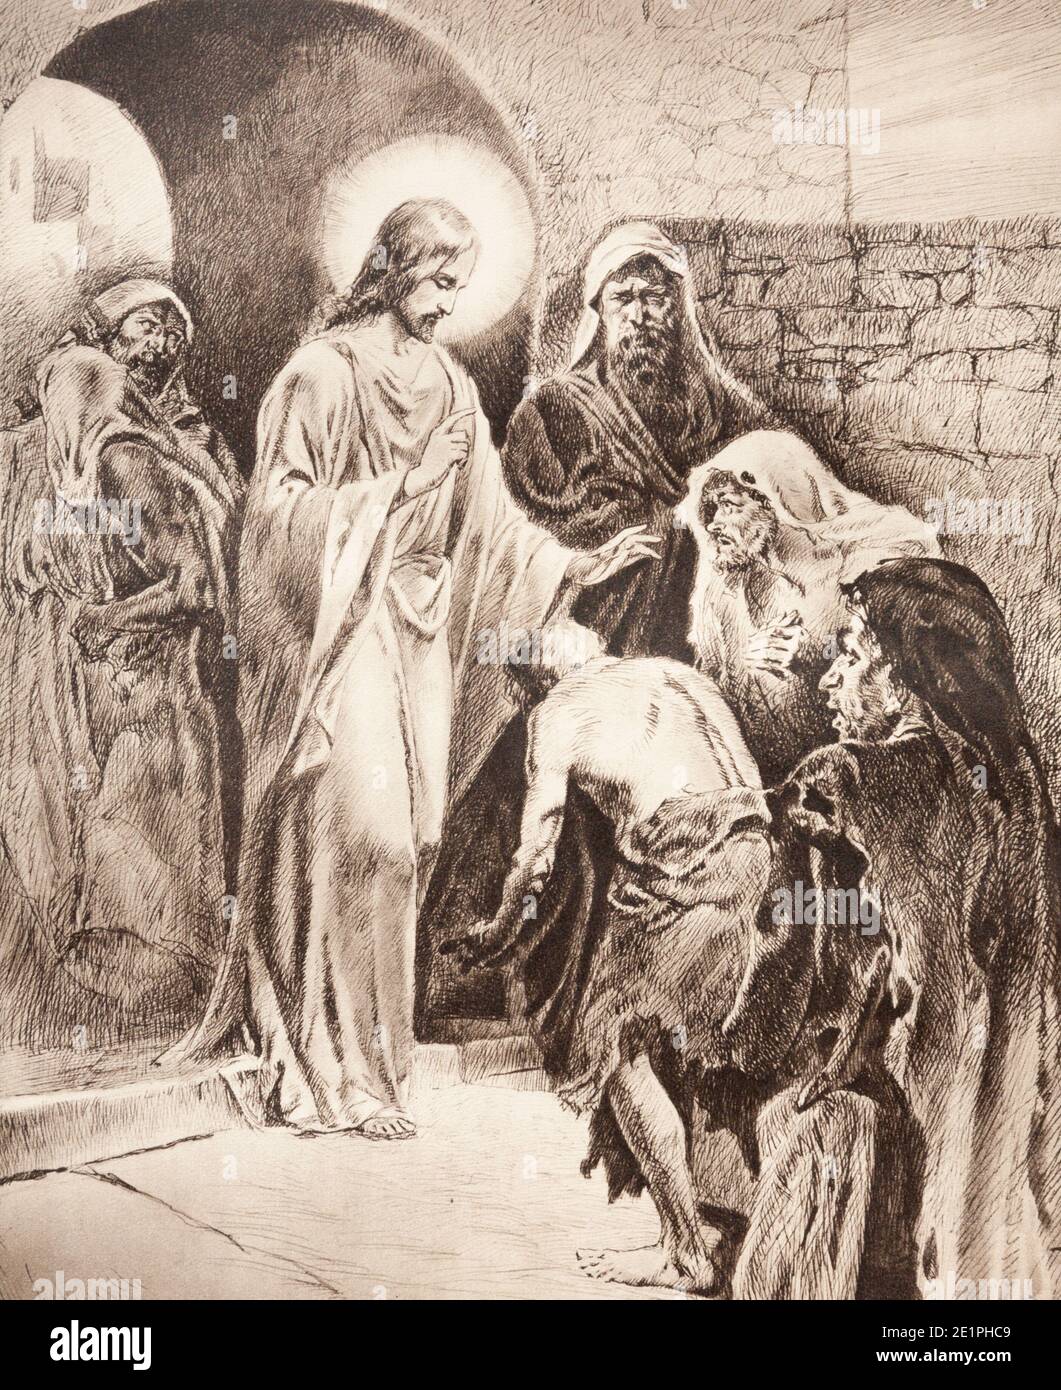 SEBECHLEBY, SLOVAKIA - SEPTEMBER 24, 2011: The lithography of Healed Jesus originaly by unknown artist. Stock Photo